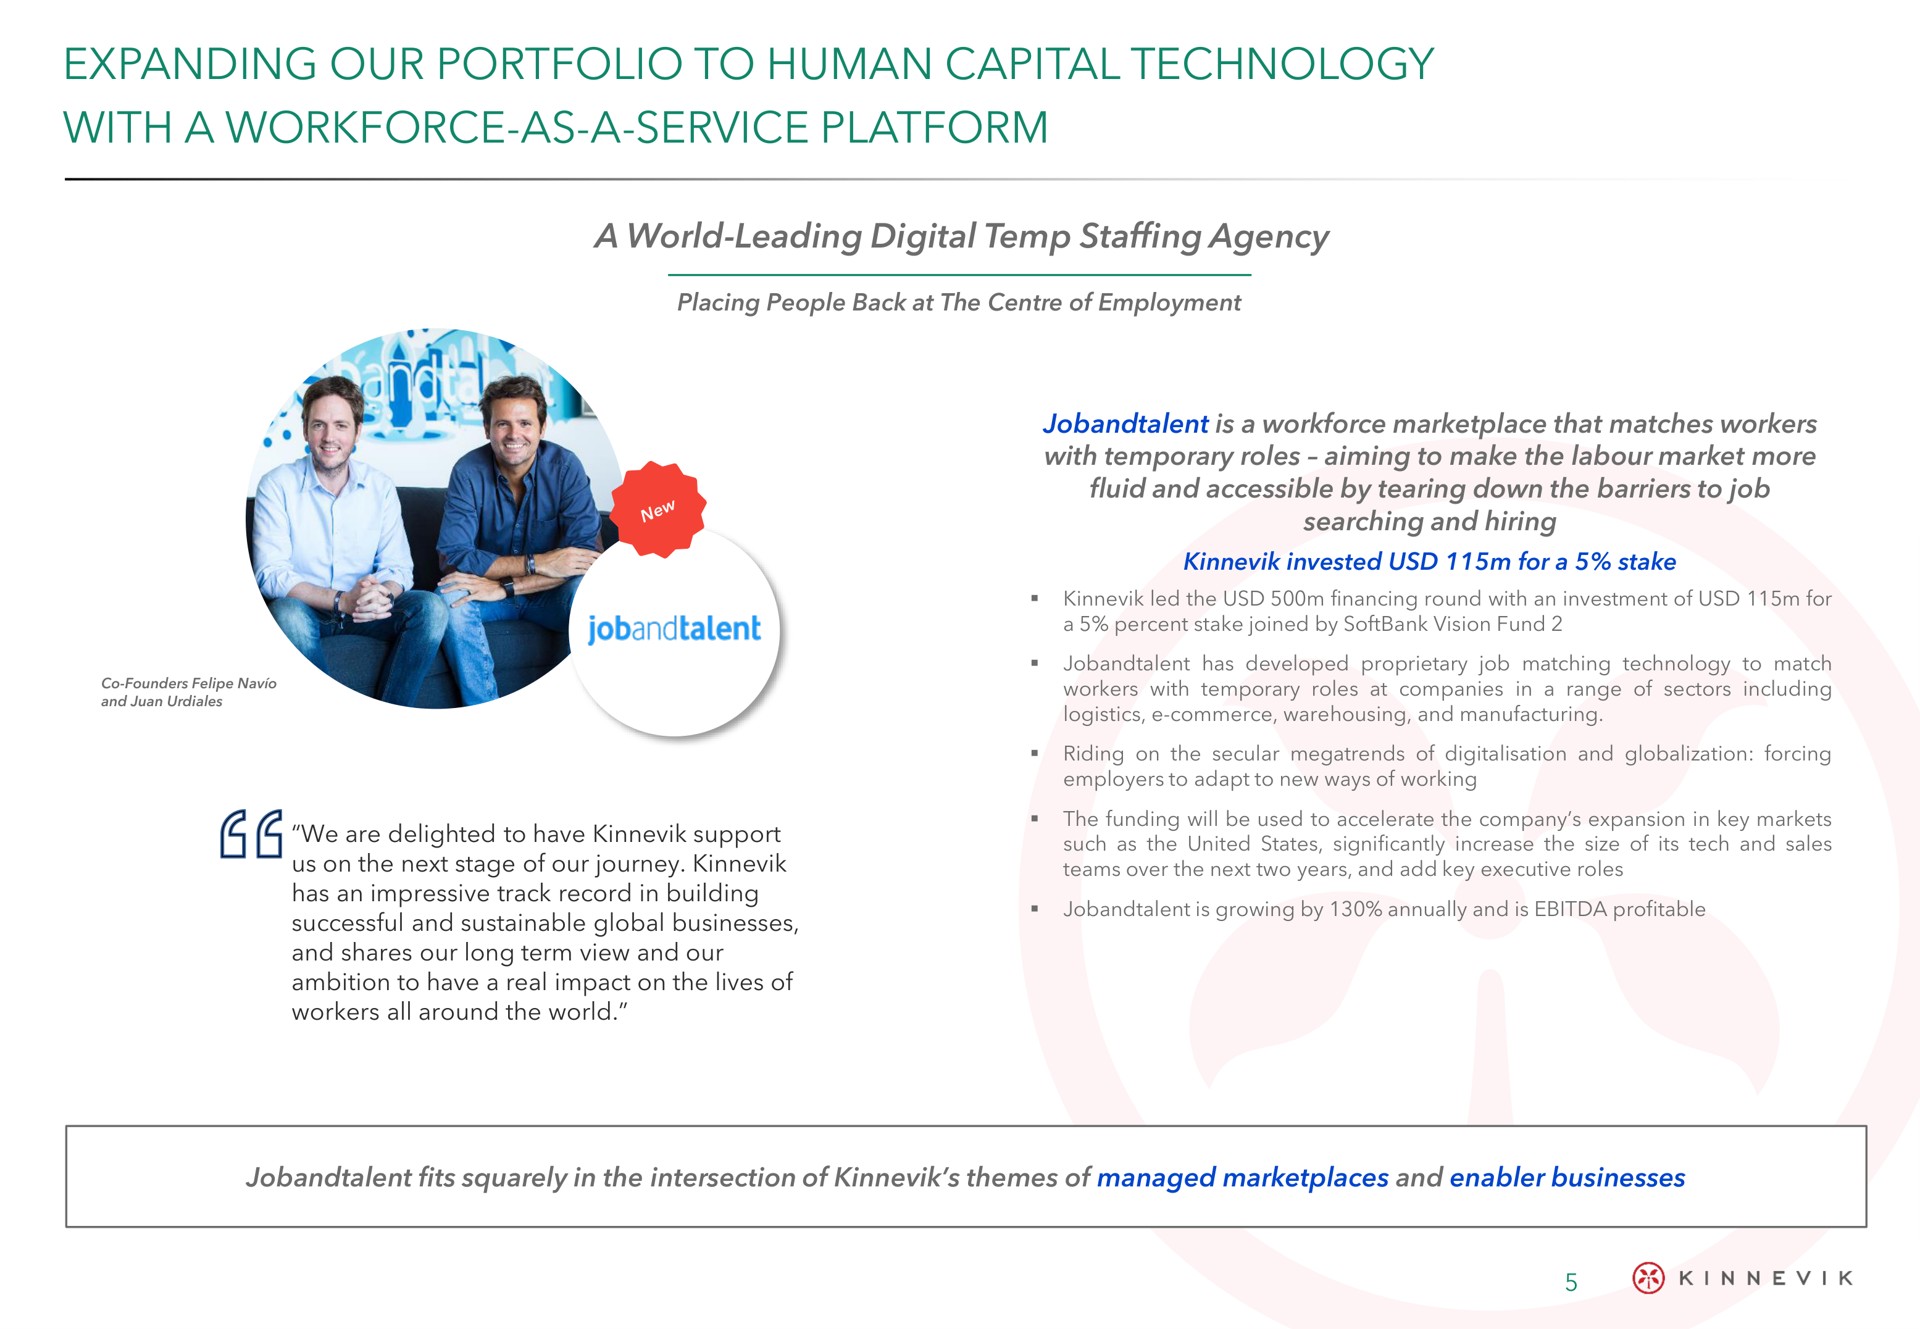 expanding our portfolio to human capital technology with a as a service platform | Kinnevik